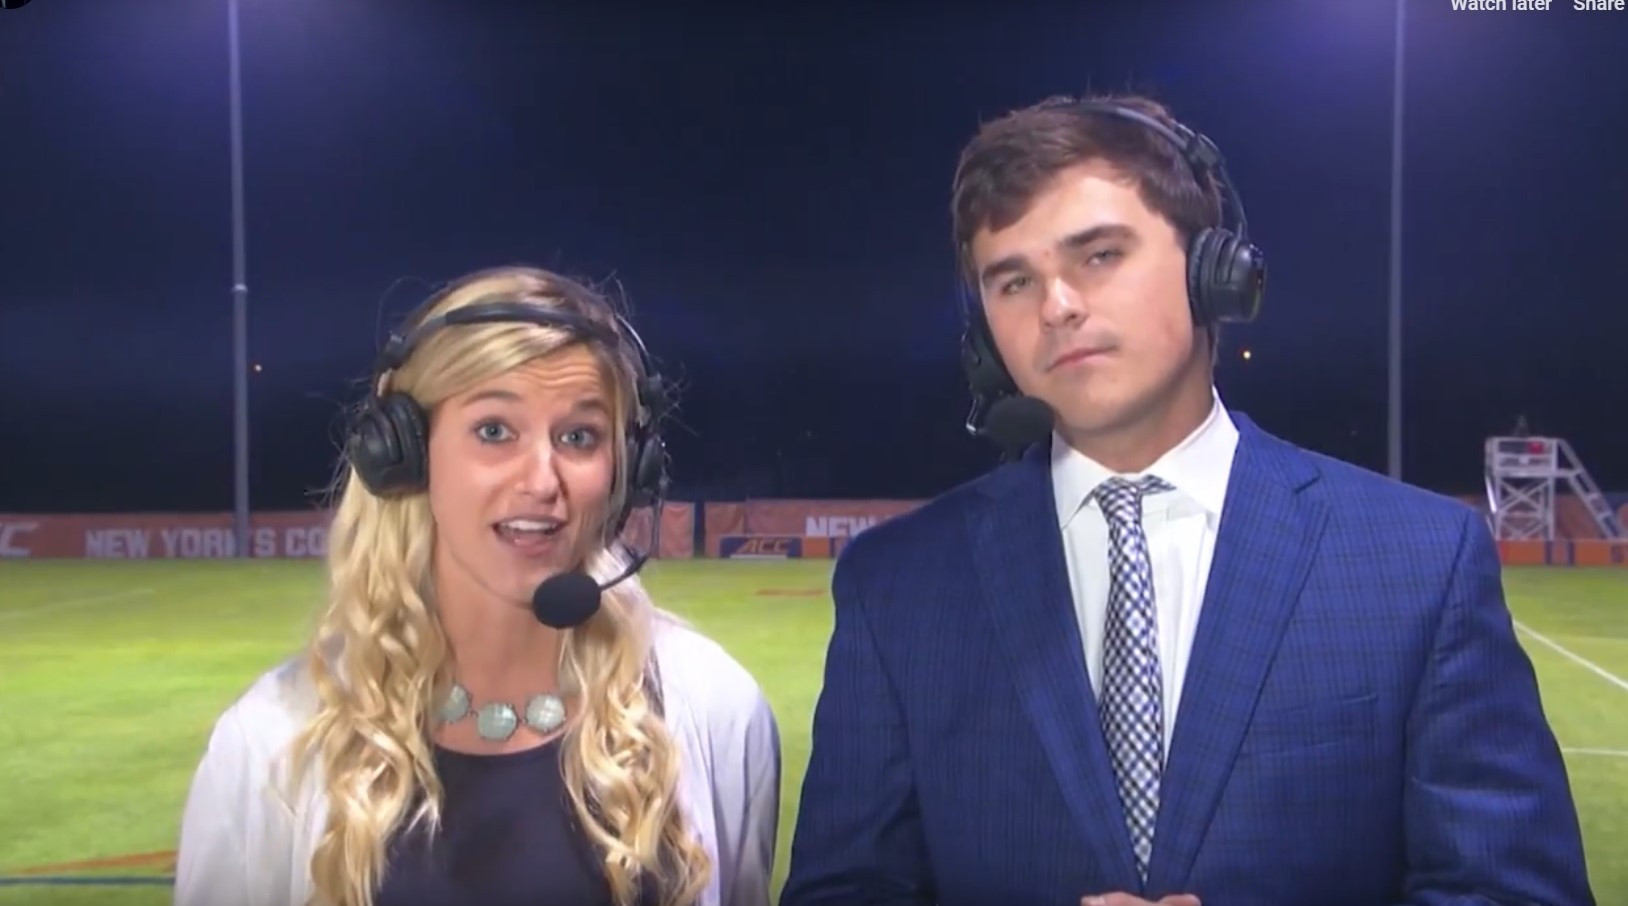 Freeze frame from Erin Fish's demo reel, in her role as color commentator for Syracuse University soccer